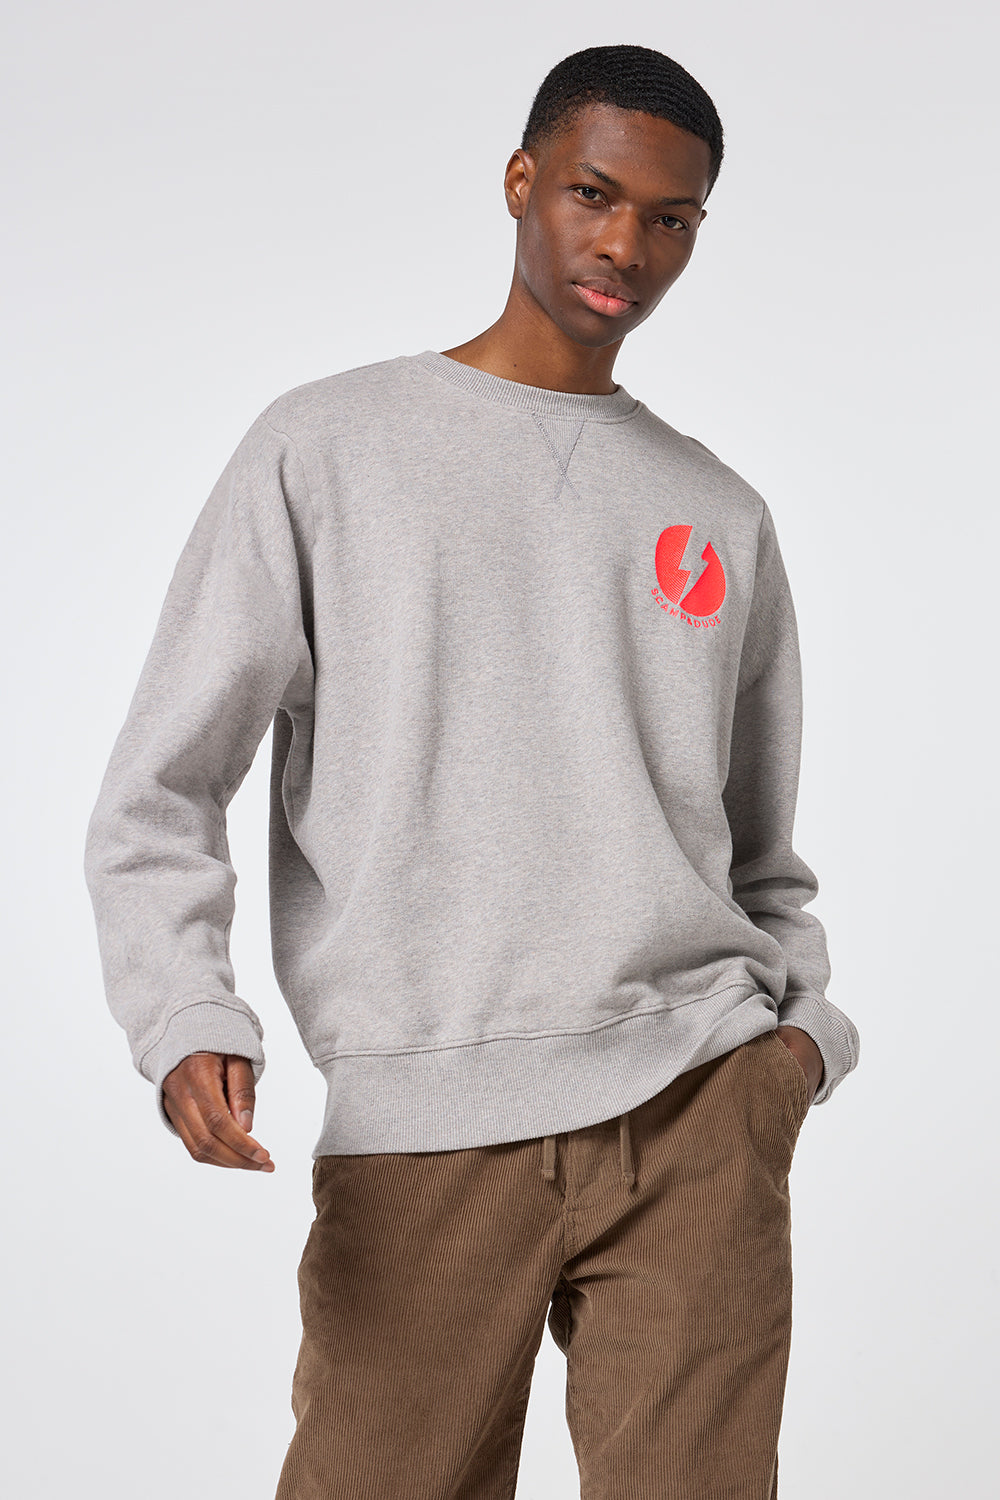 COMING SOON: Men’s Grey Marl with Placement Bolt Graphics Sweatshirt